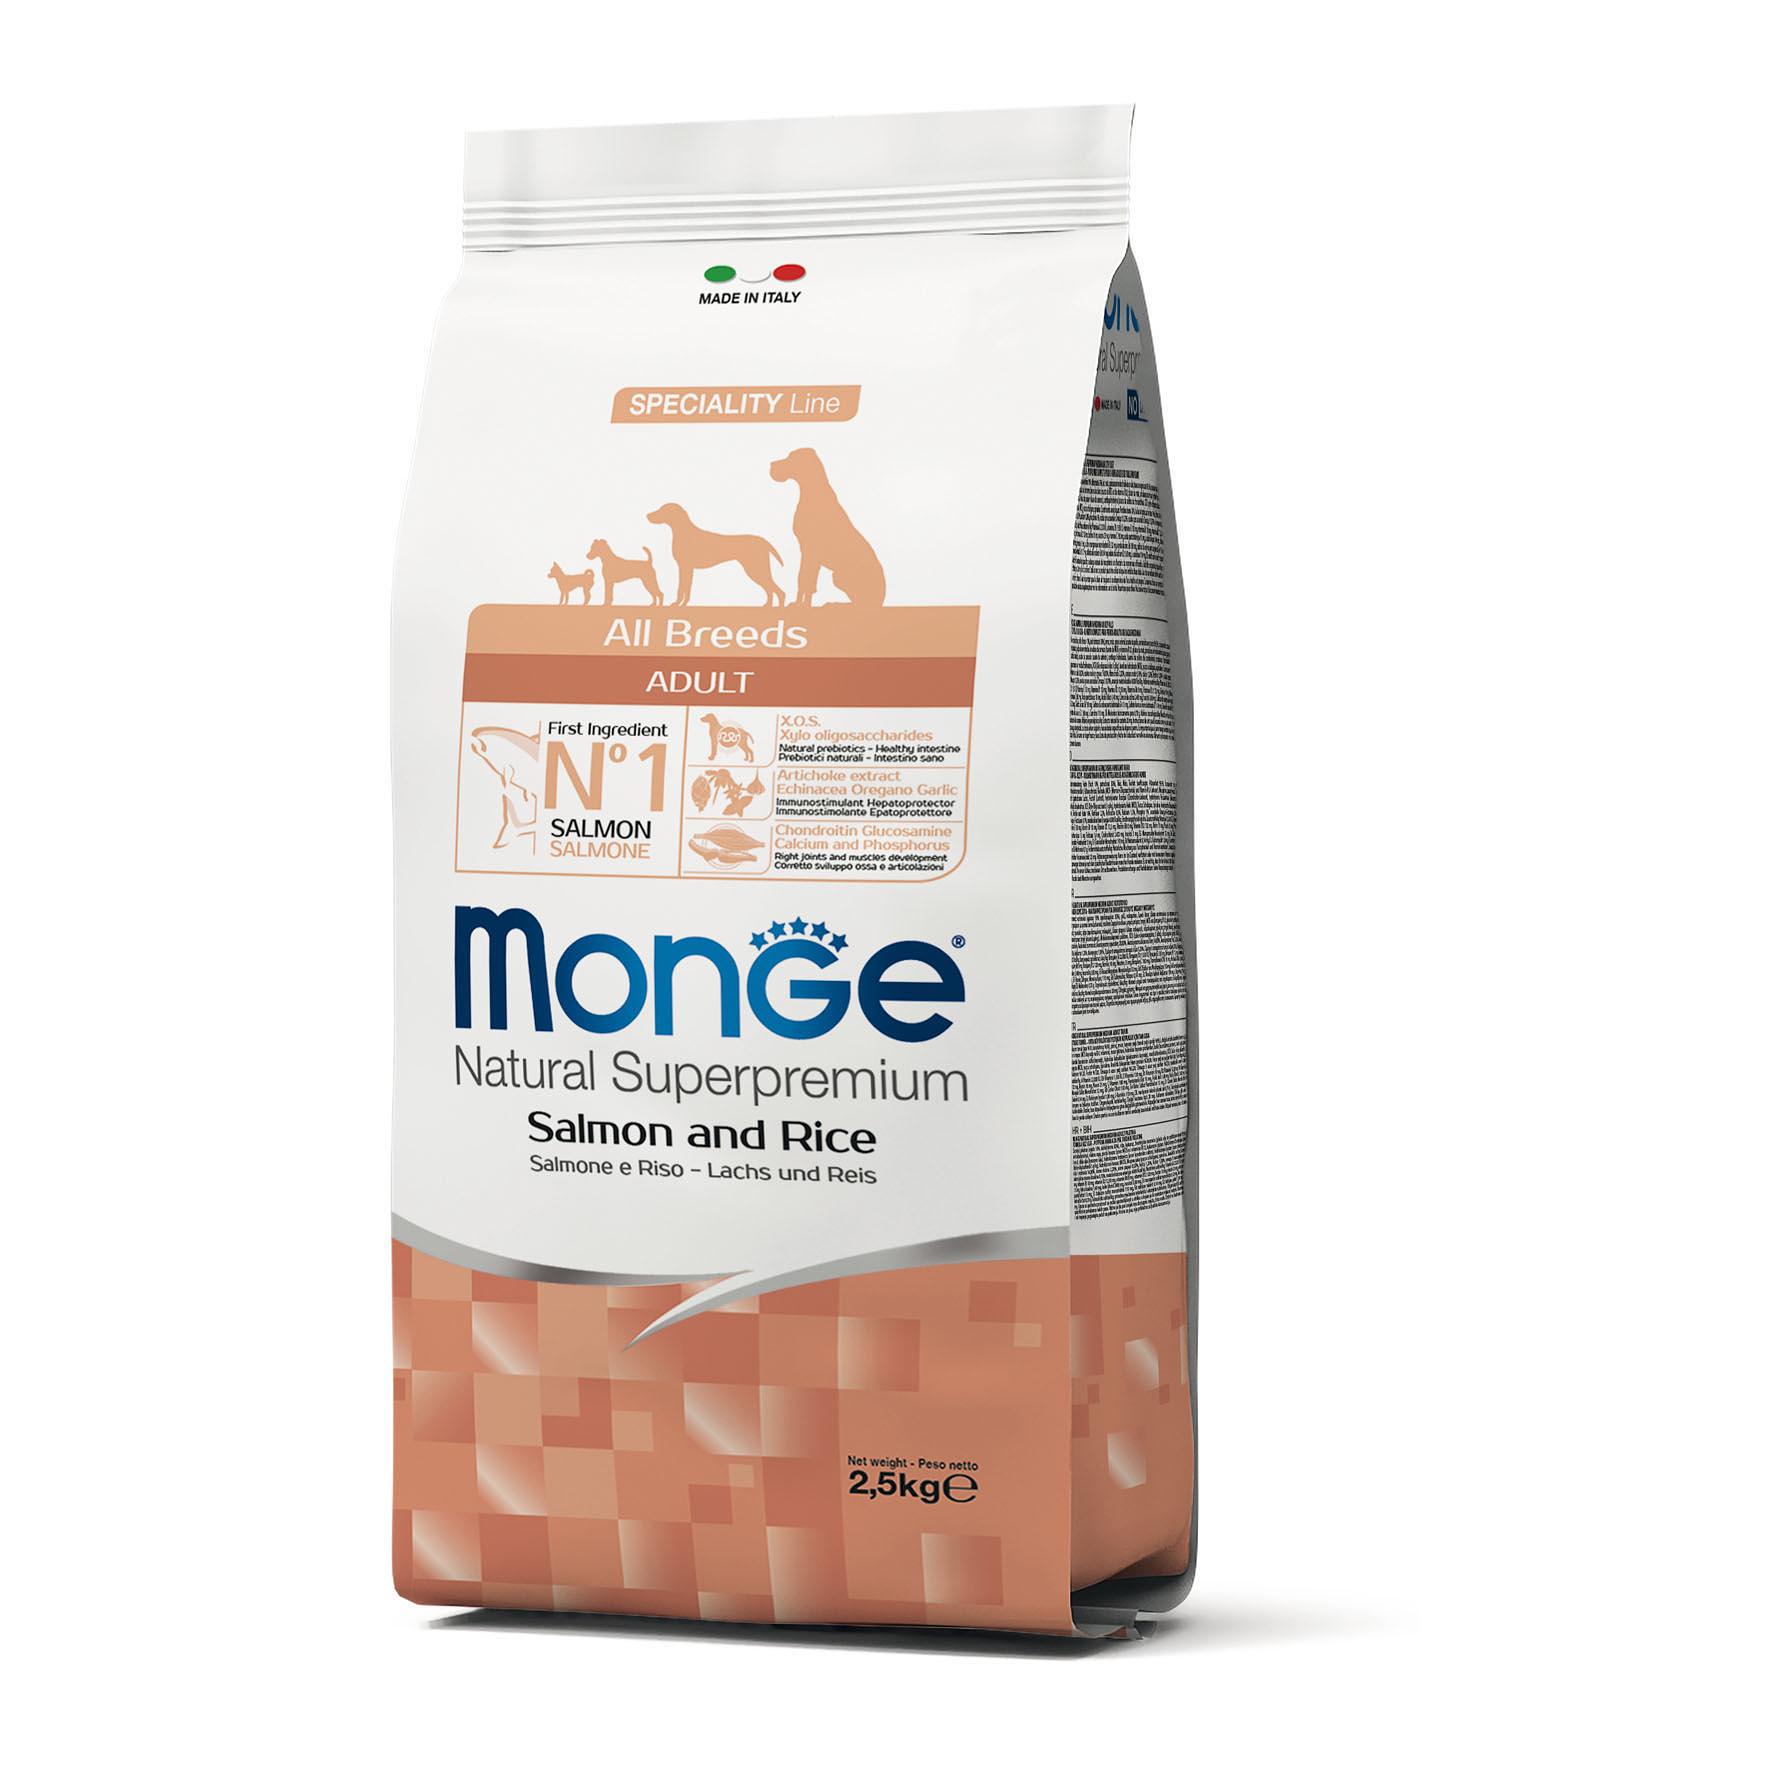 Monge Speciality Line All Breeds – Saumon